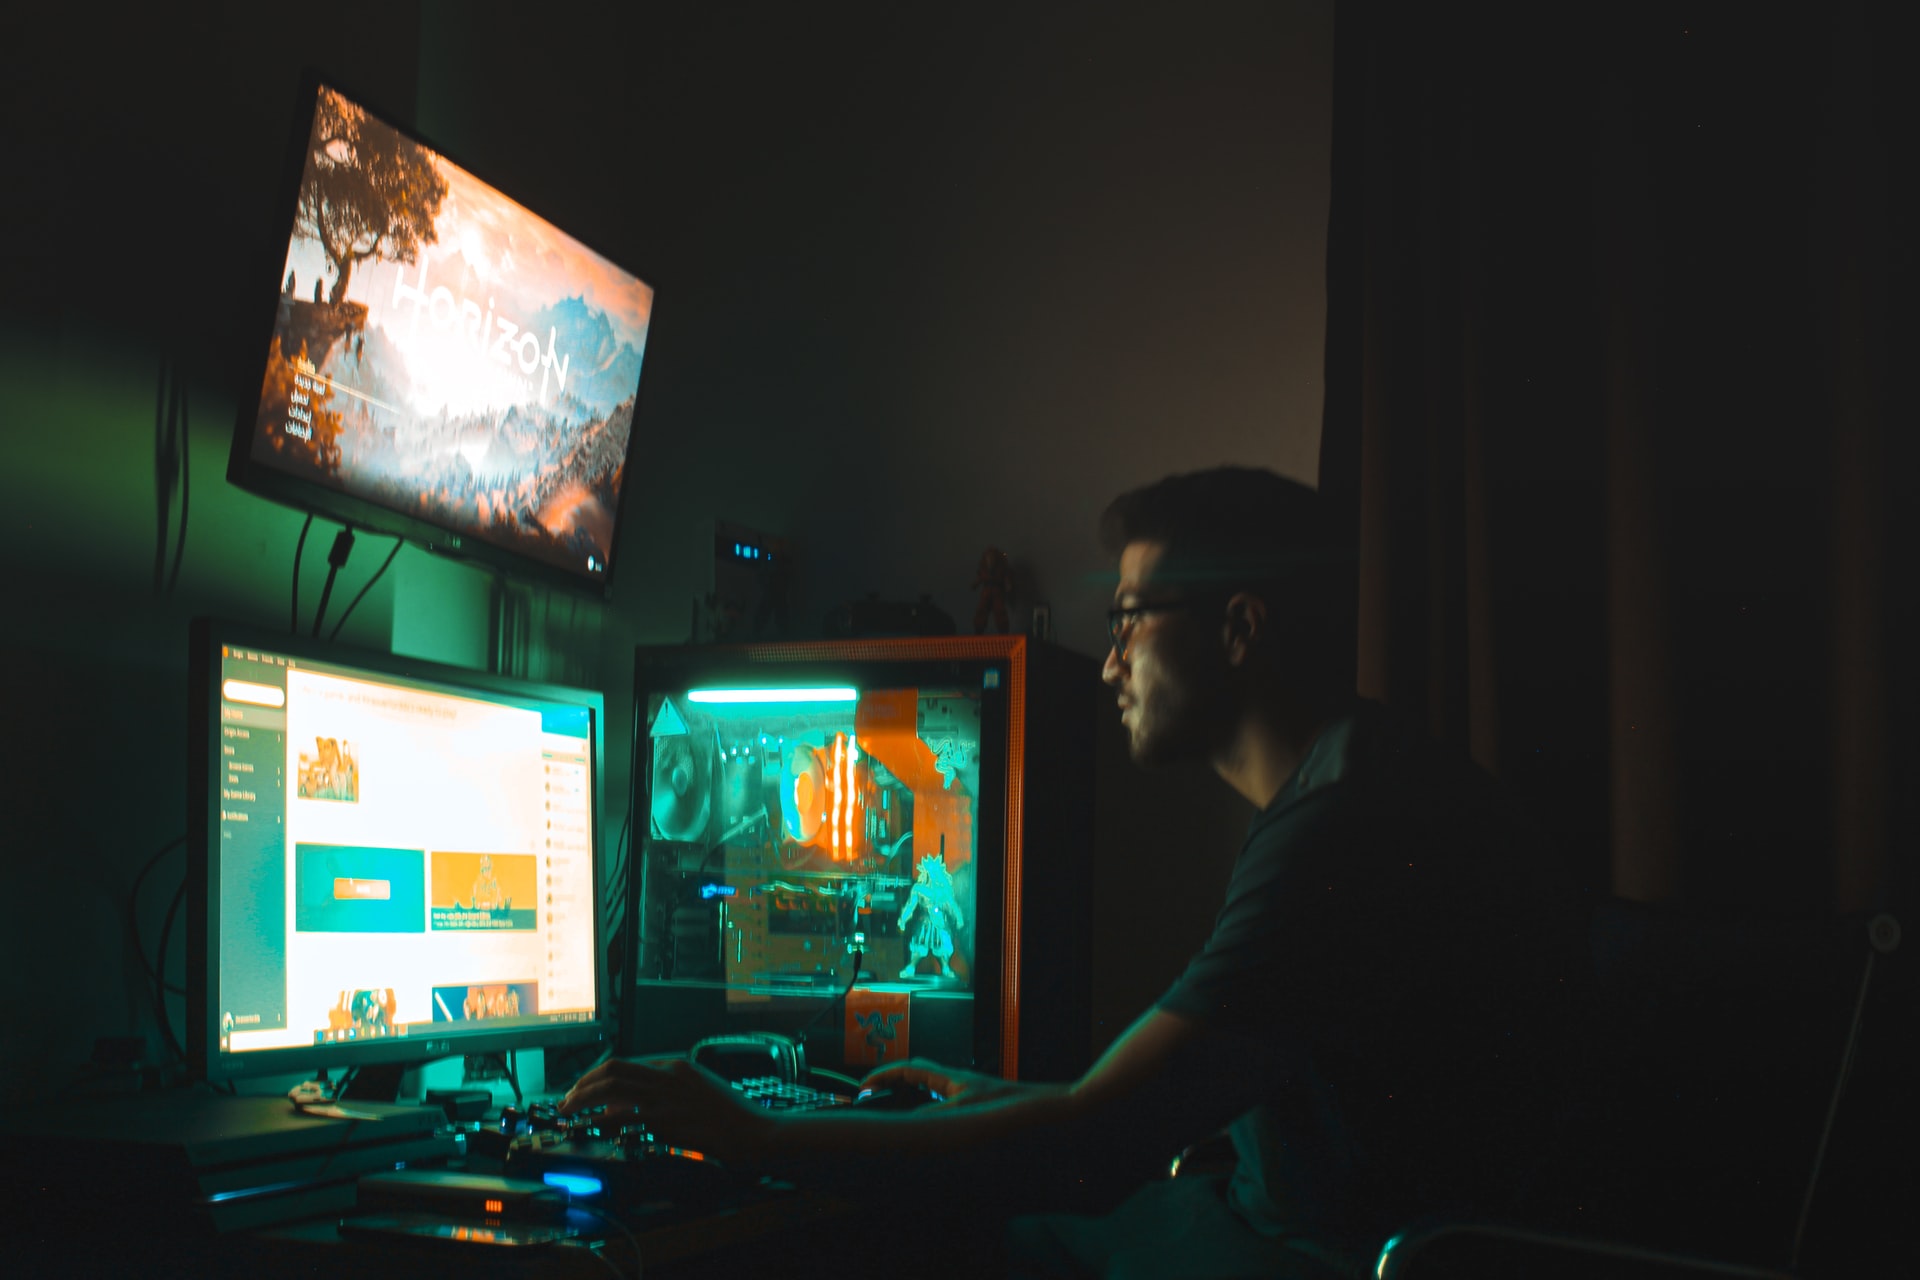 5 Common Marketing Problems Faced by Small Gaming Studios